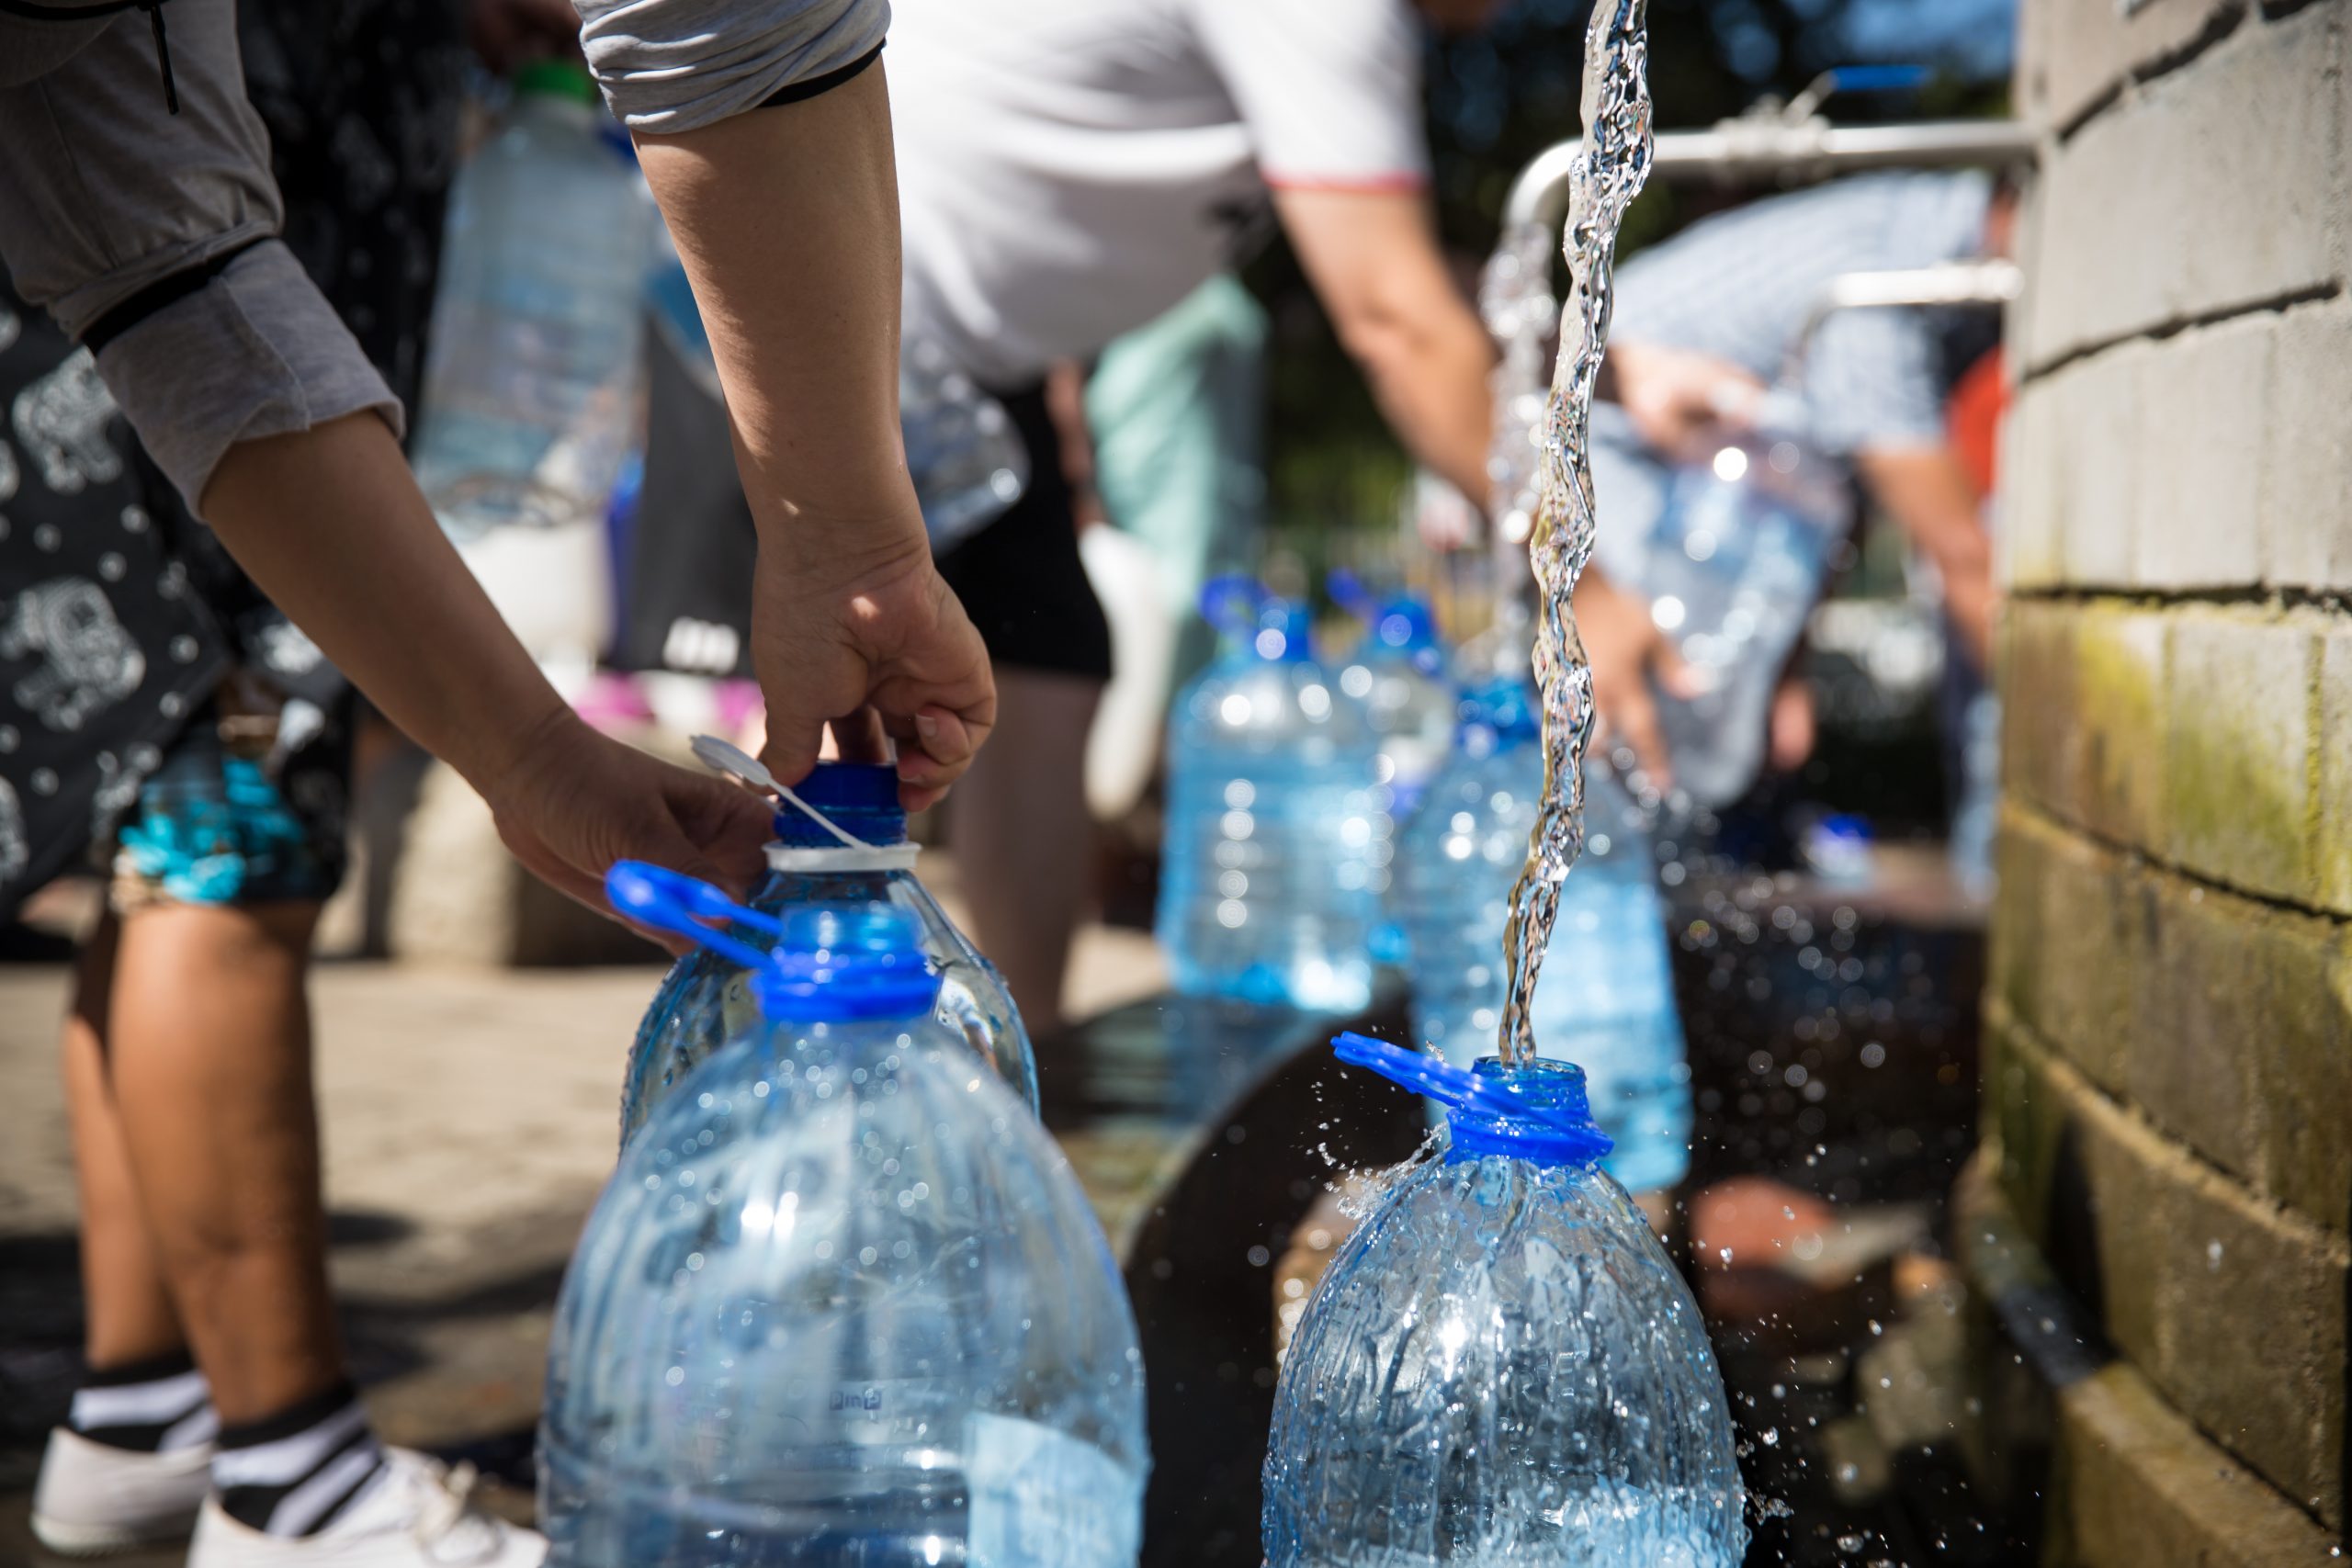 People collecting spring water in plastic bottles